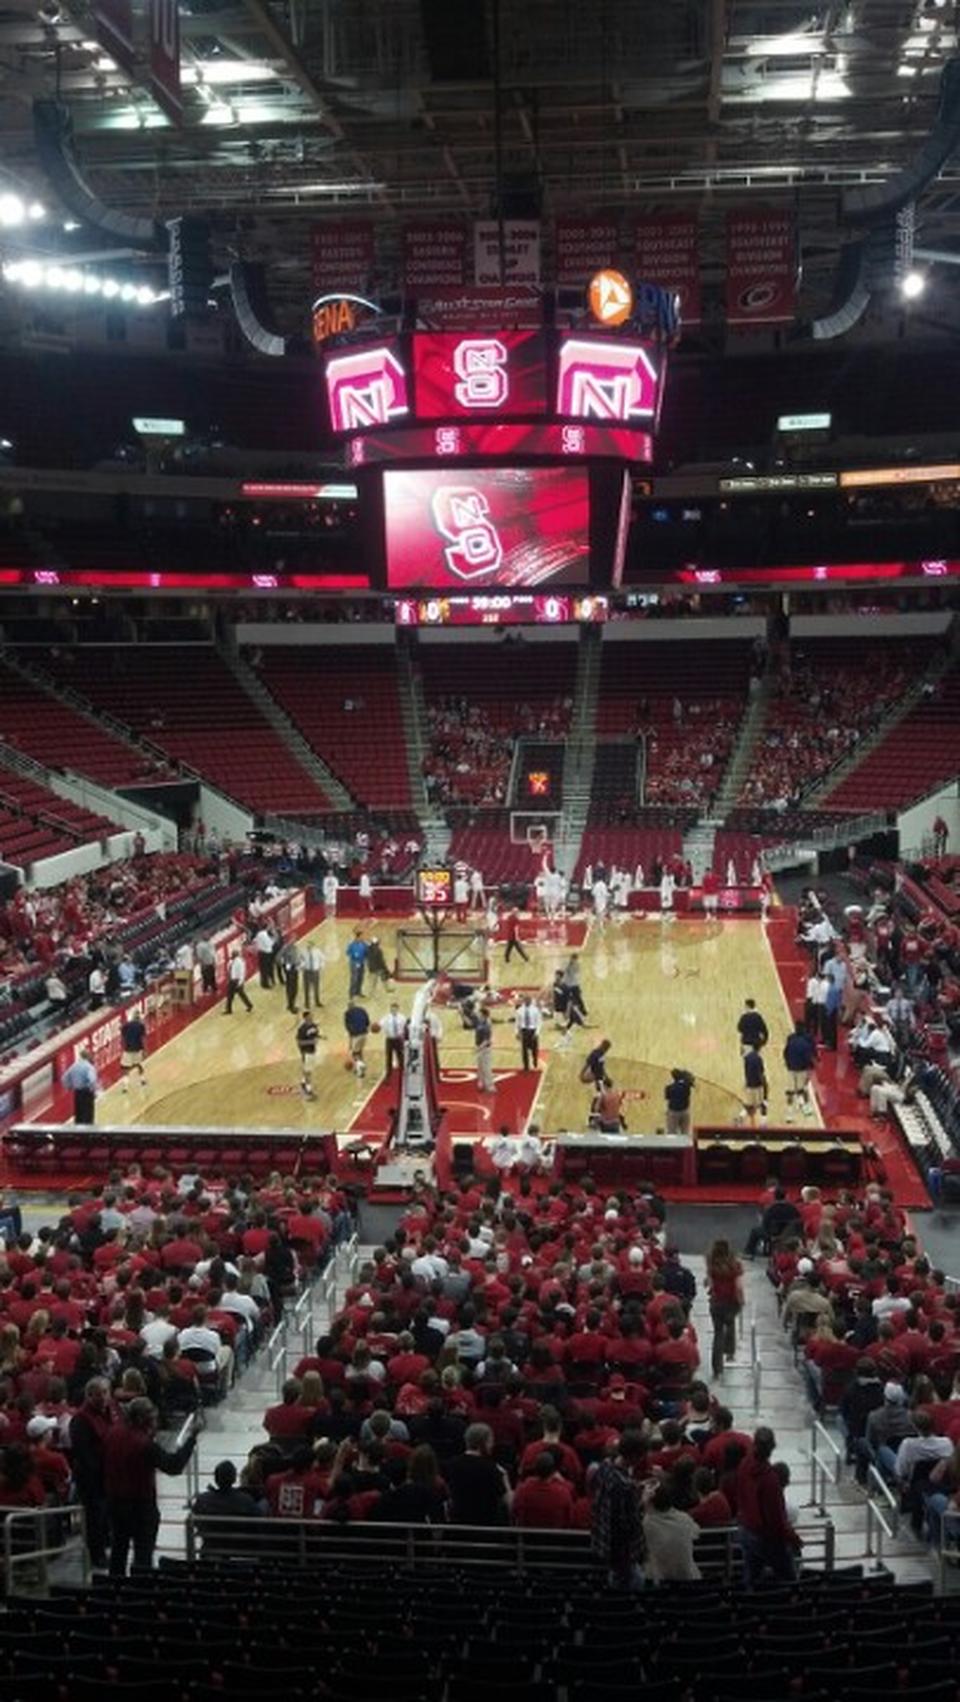 section 226 seat view  for basketball - pnc arena